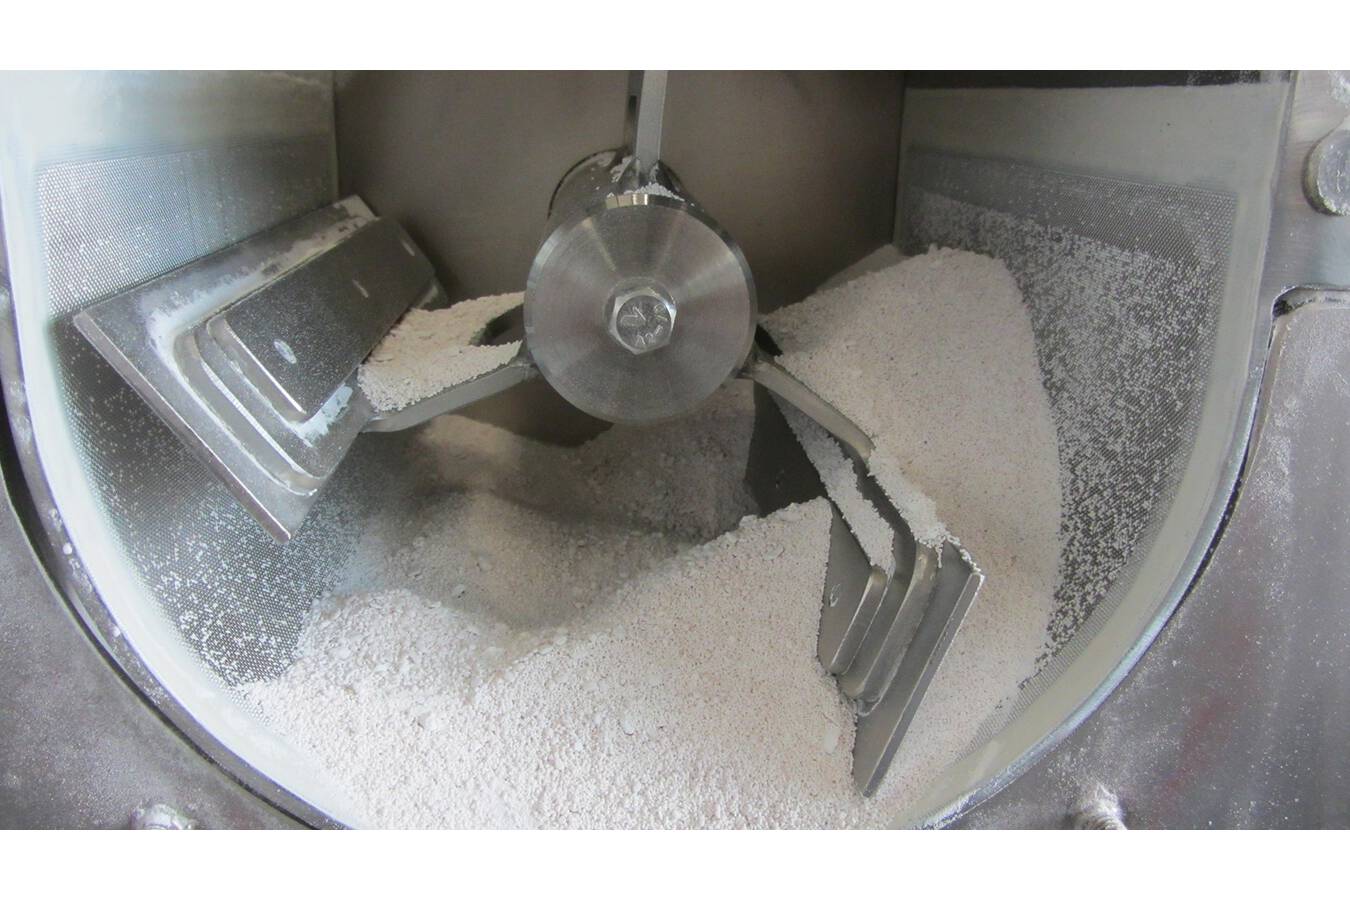 Dissolving agglomerates efficiently When processing bulk solids, agglomerates can occur that impair the production process.
How can they be separated or dissolved as efficiently as possible?